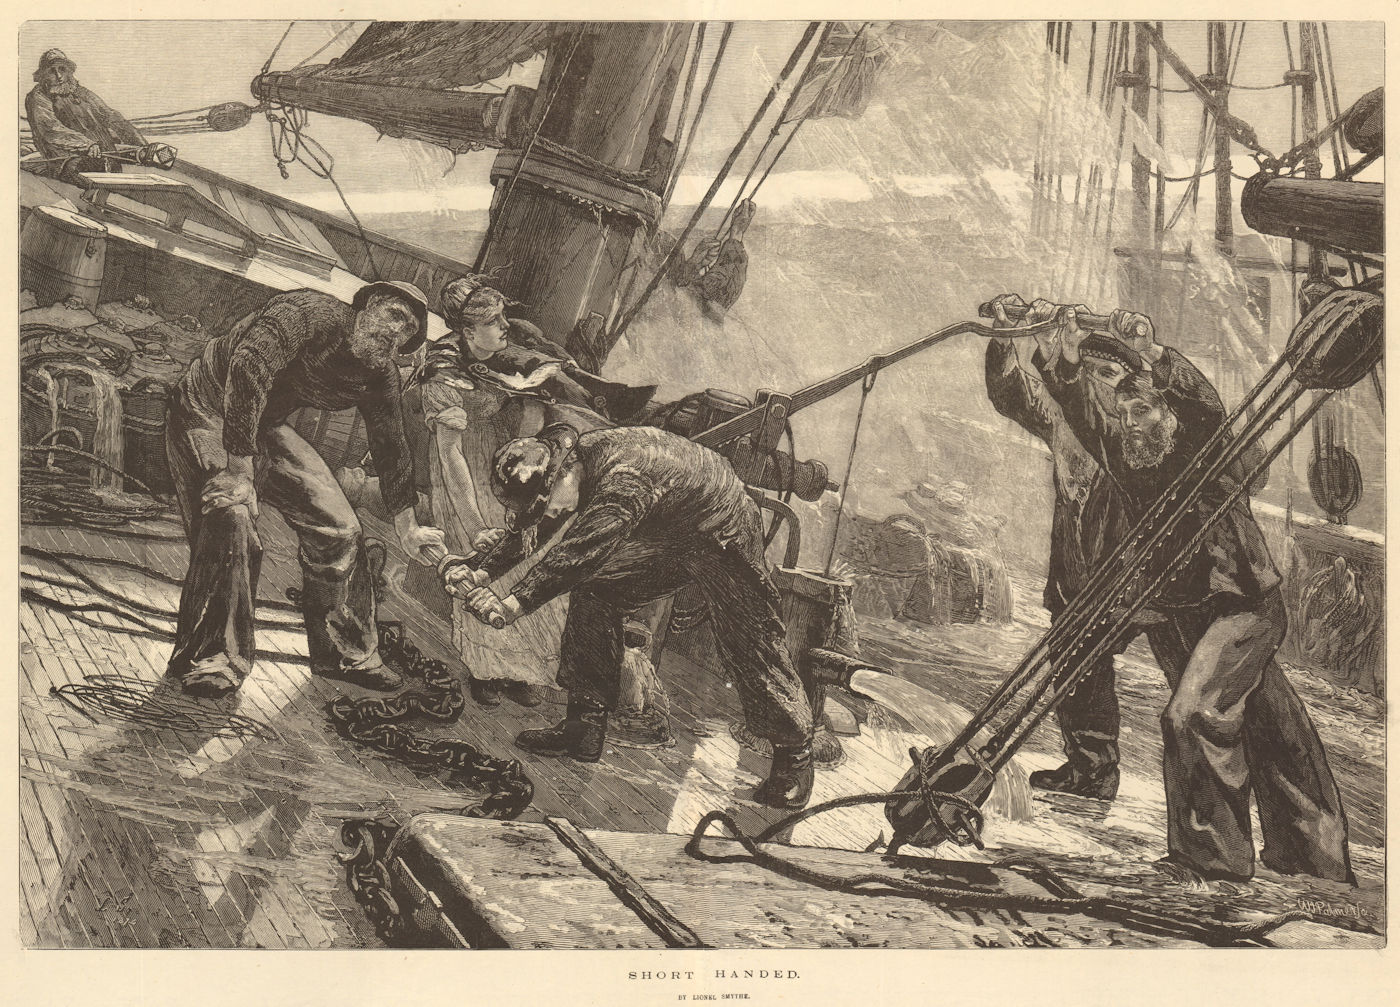 Associate Product "Short handed", by Lionel Smythe. Ship in a storm 1874 old antique print